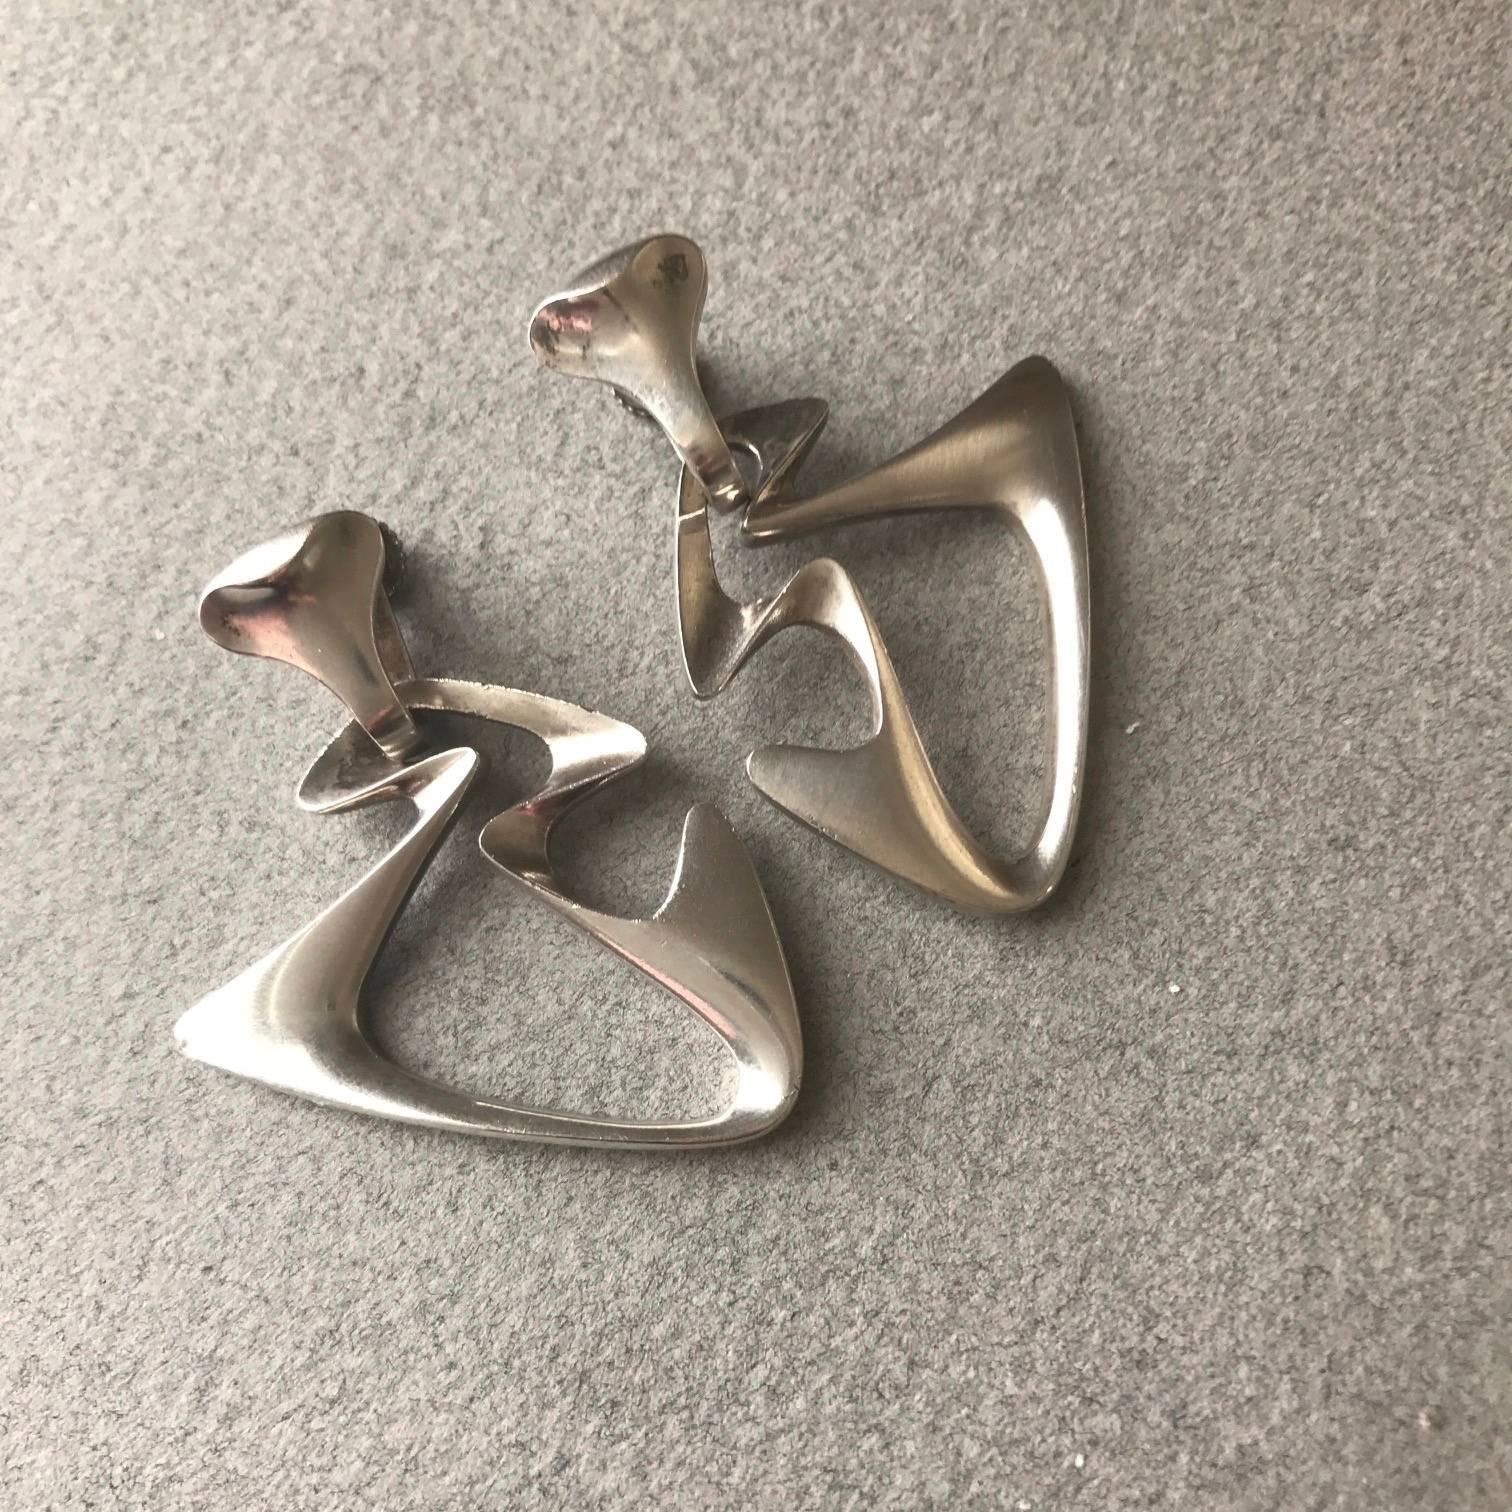 Georg Jensen "Amoeba" Dangle Earrings by Henning Koppel, no. 125
 

Dramatic and highly sculptural with screw-backs clasps.

A similar example can be seen in the book, GEORG JENSEN JEWELRY by Isabelle Anscombe, edited by David A. Taylor.